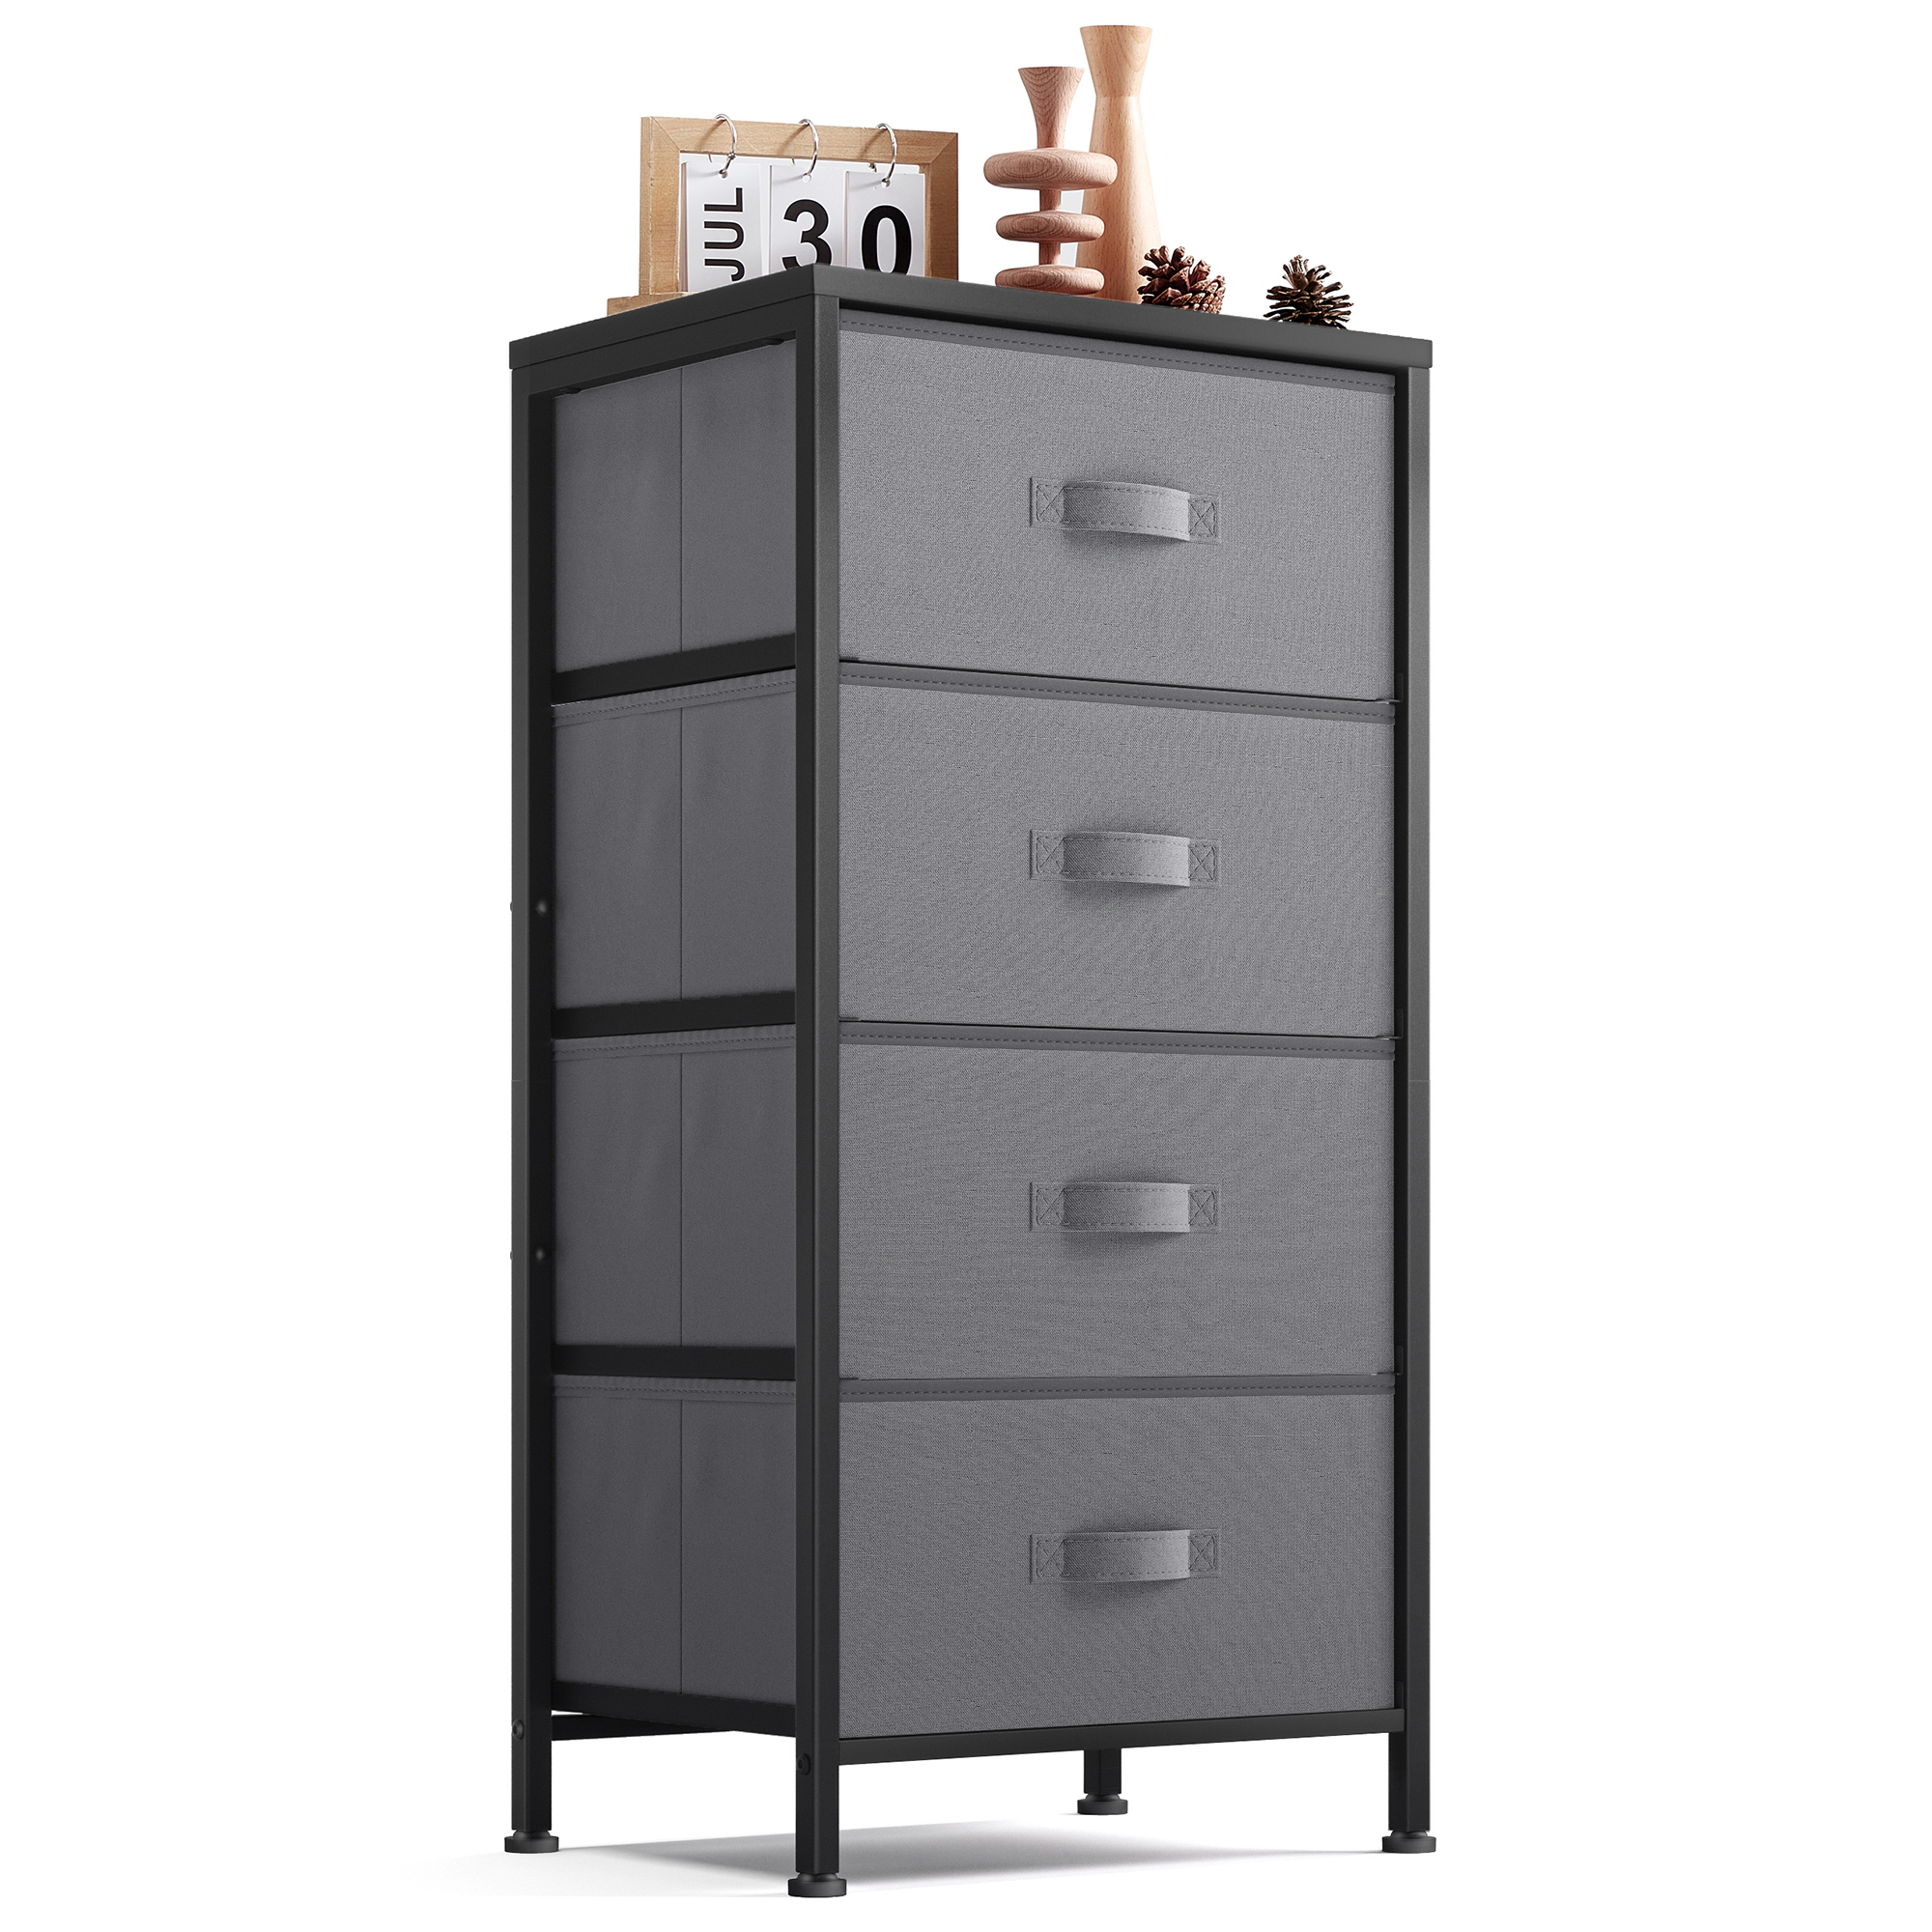 Dresser for Bedroom, 4 Drawers, Chest of Drawers with Wood Top and Steel Frame